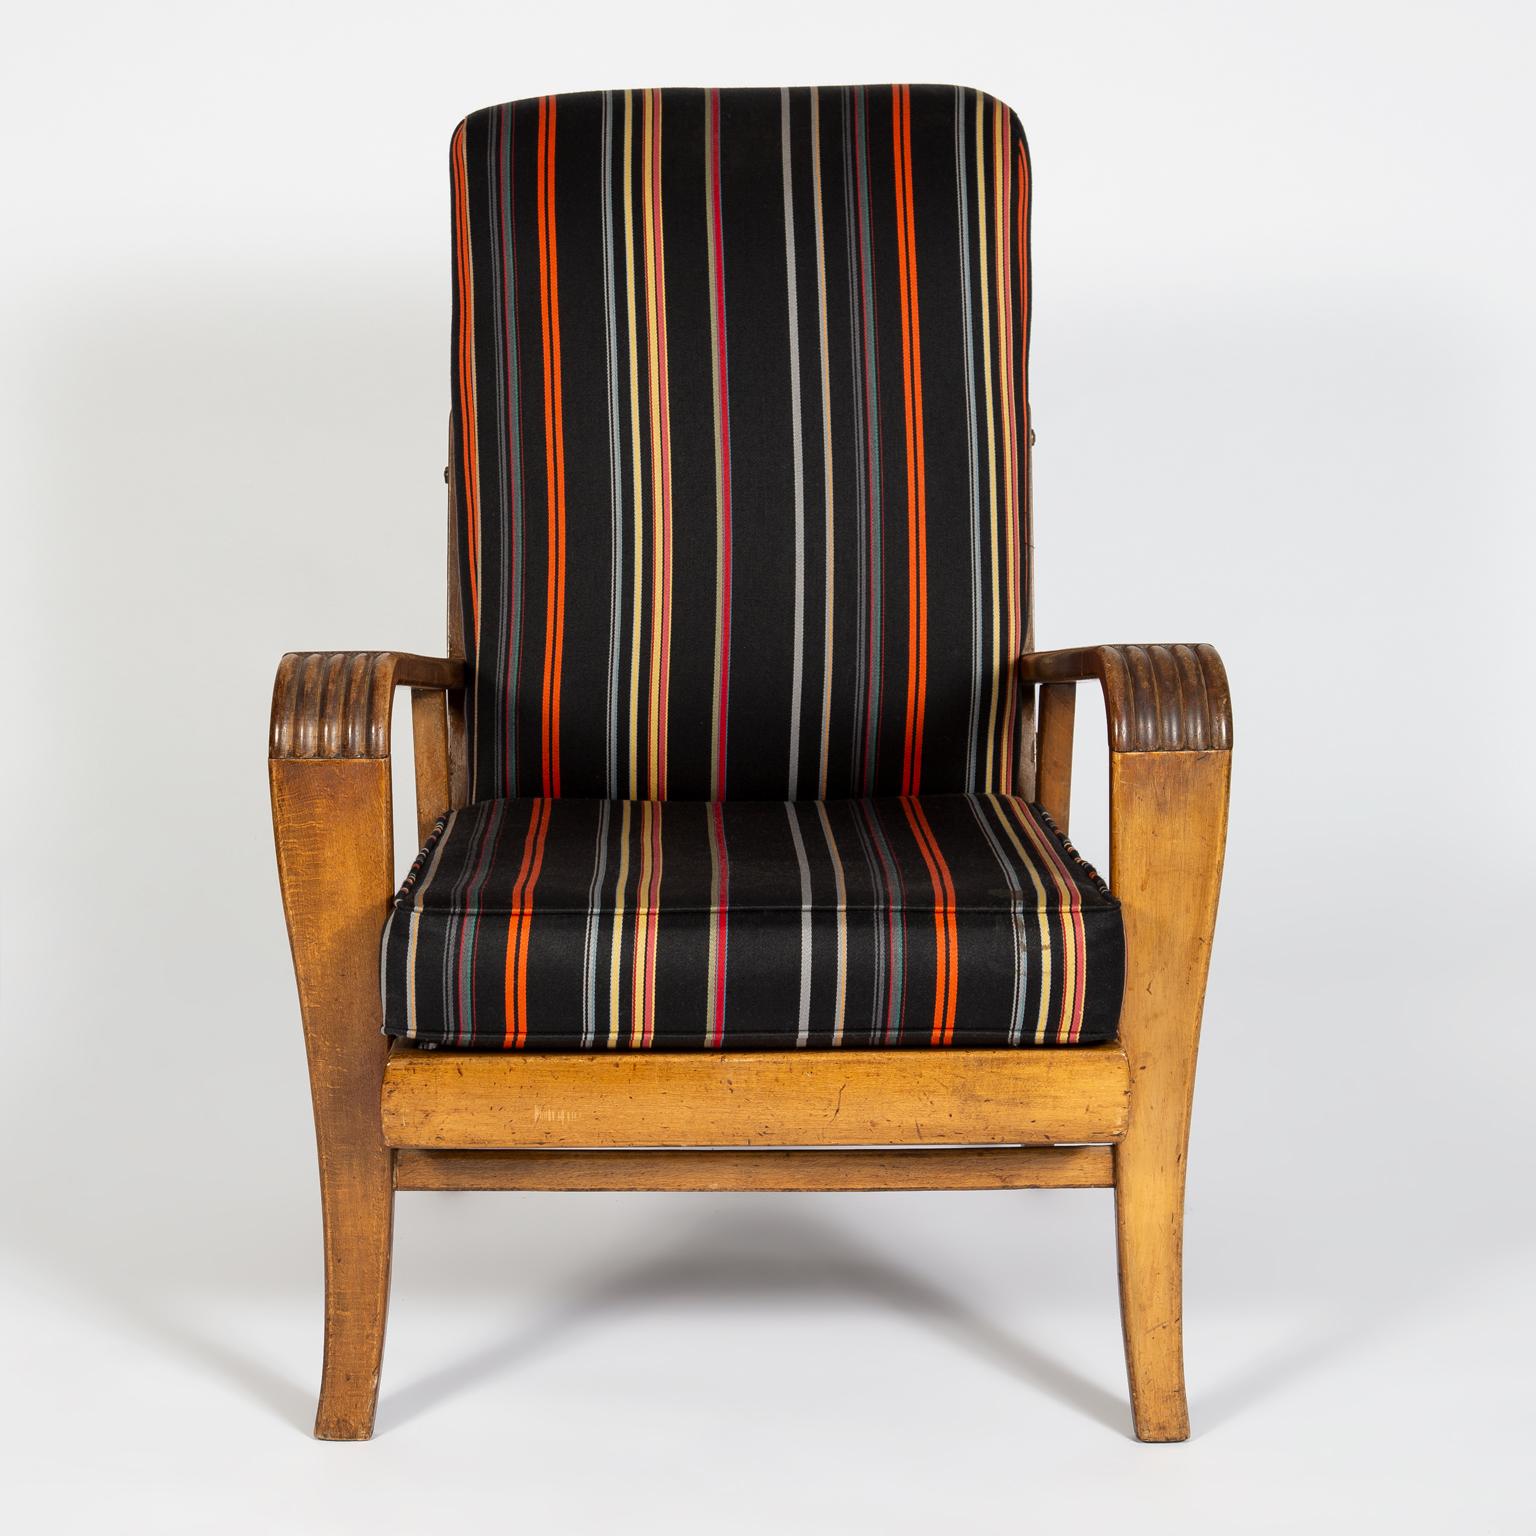 Art Deco style beech wood armchair, upholstered in 'Intermittent Stripe' fabric designed by Paul Smith for Maharam.